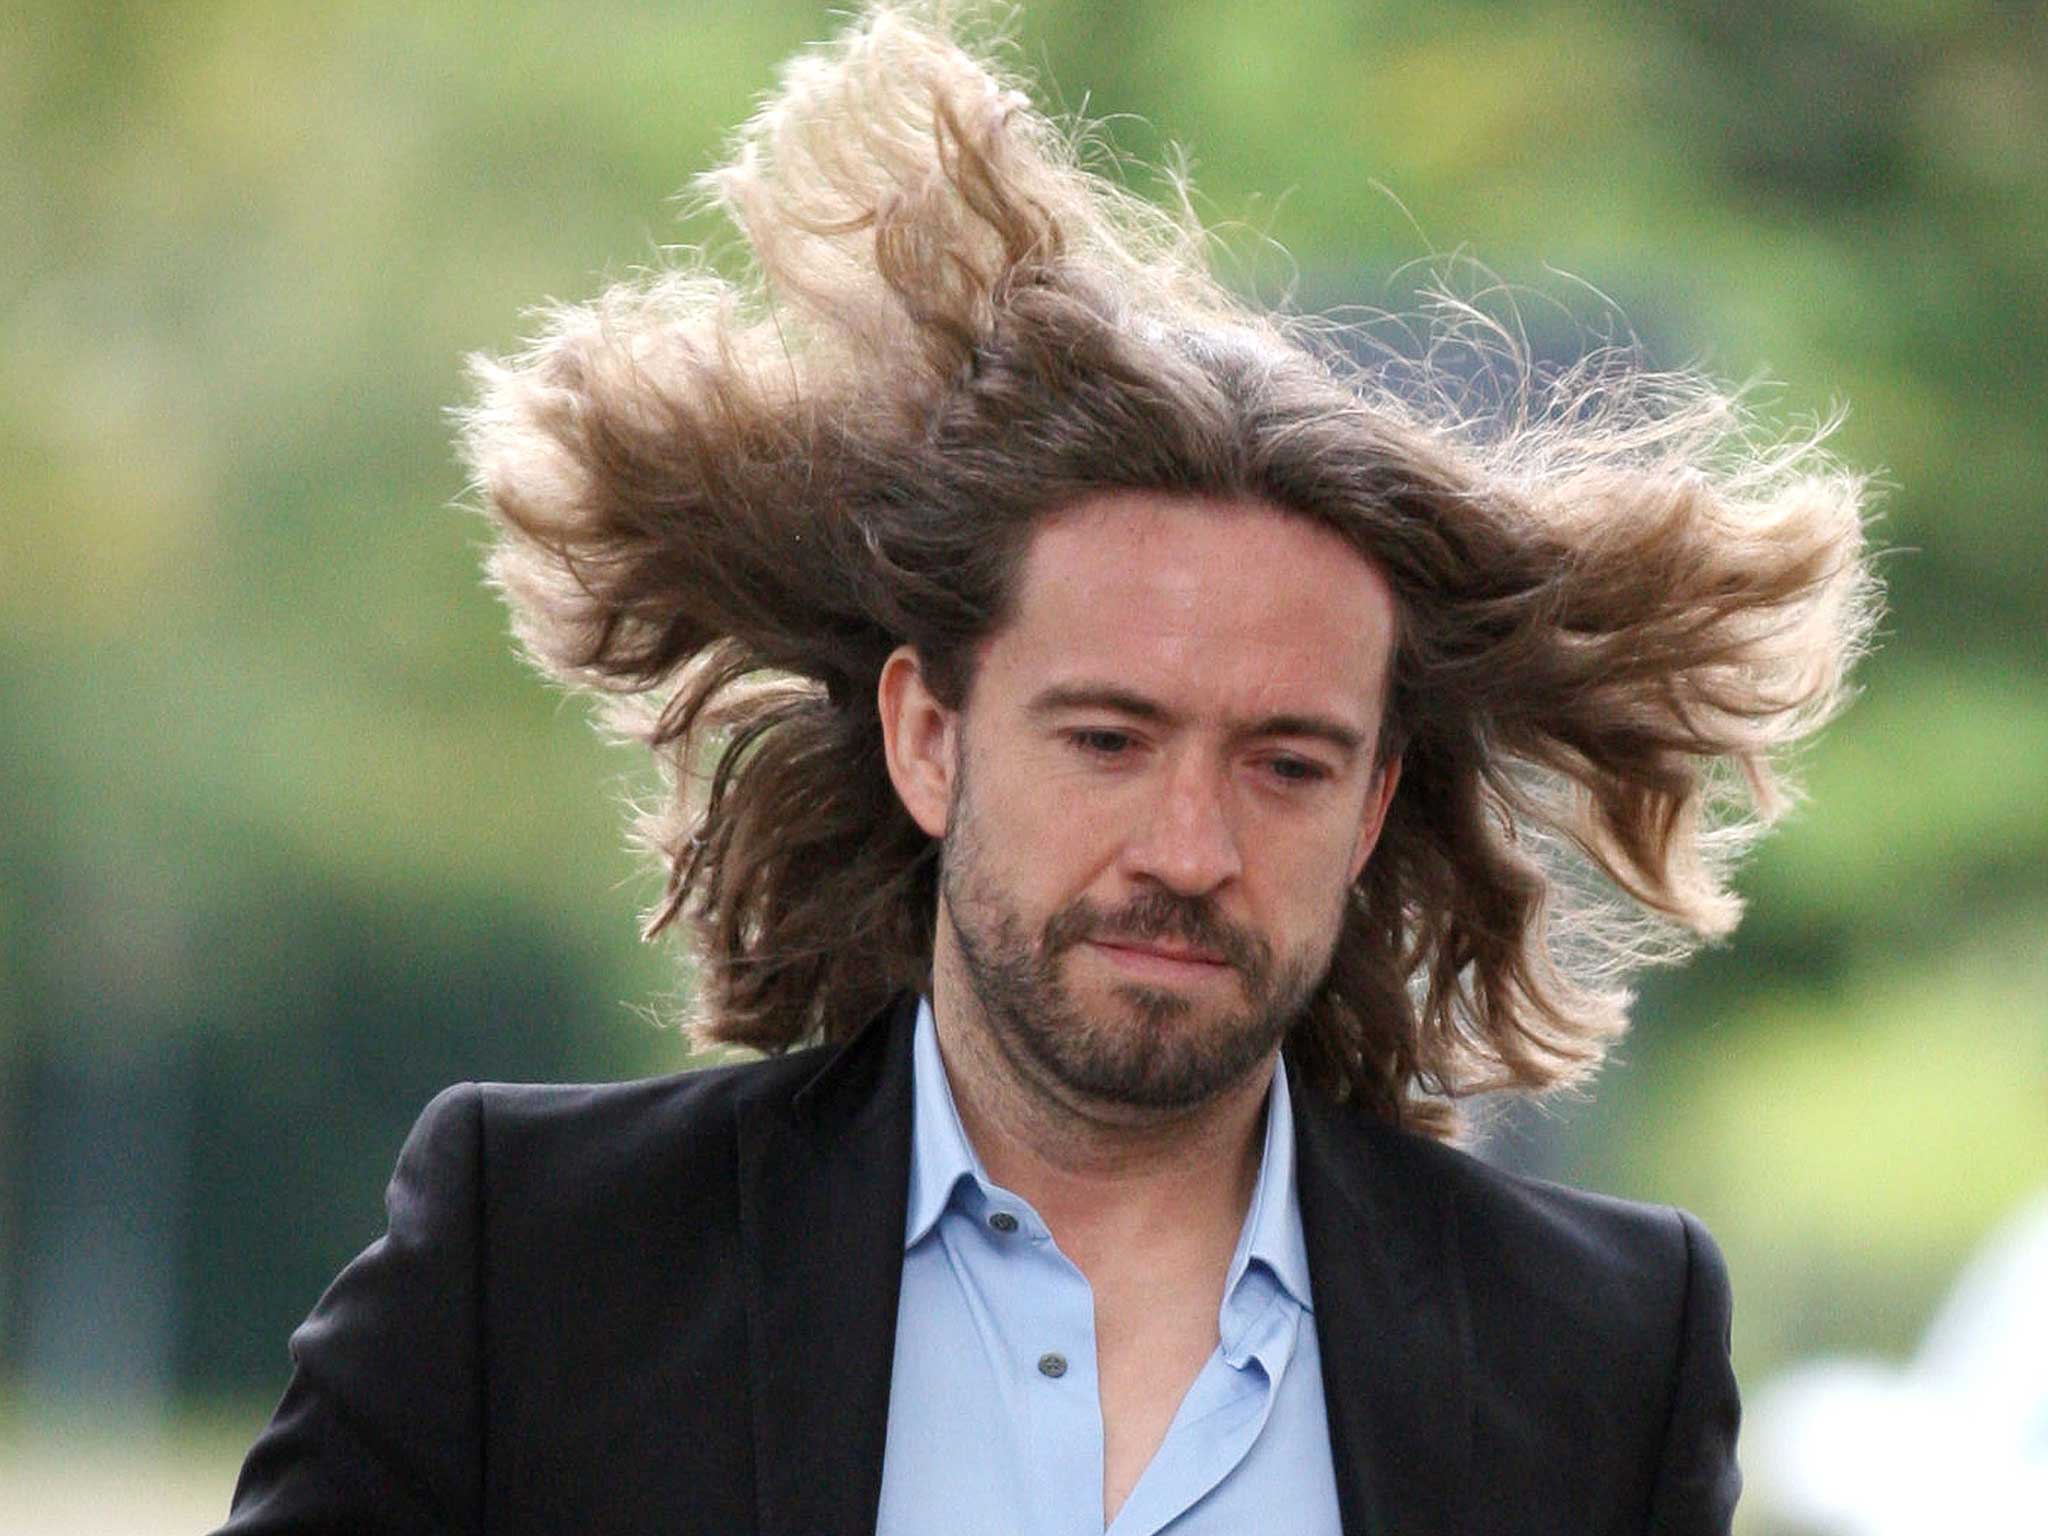 Justin Lee Collins was sentenced to 140 hours community service in October 2012